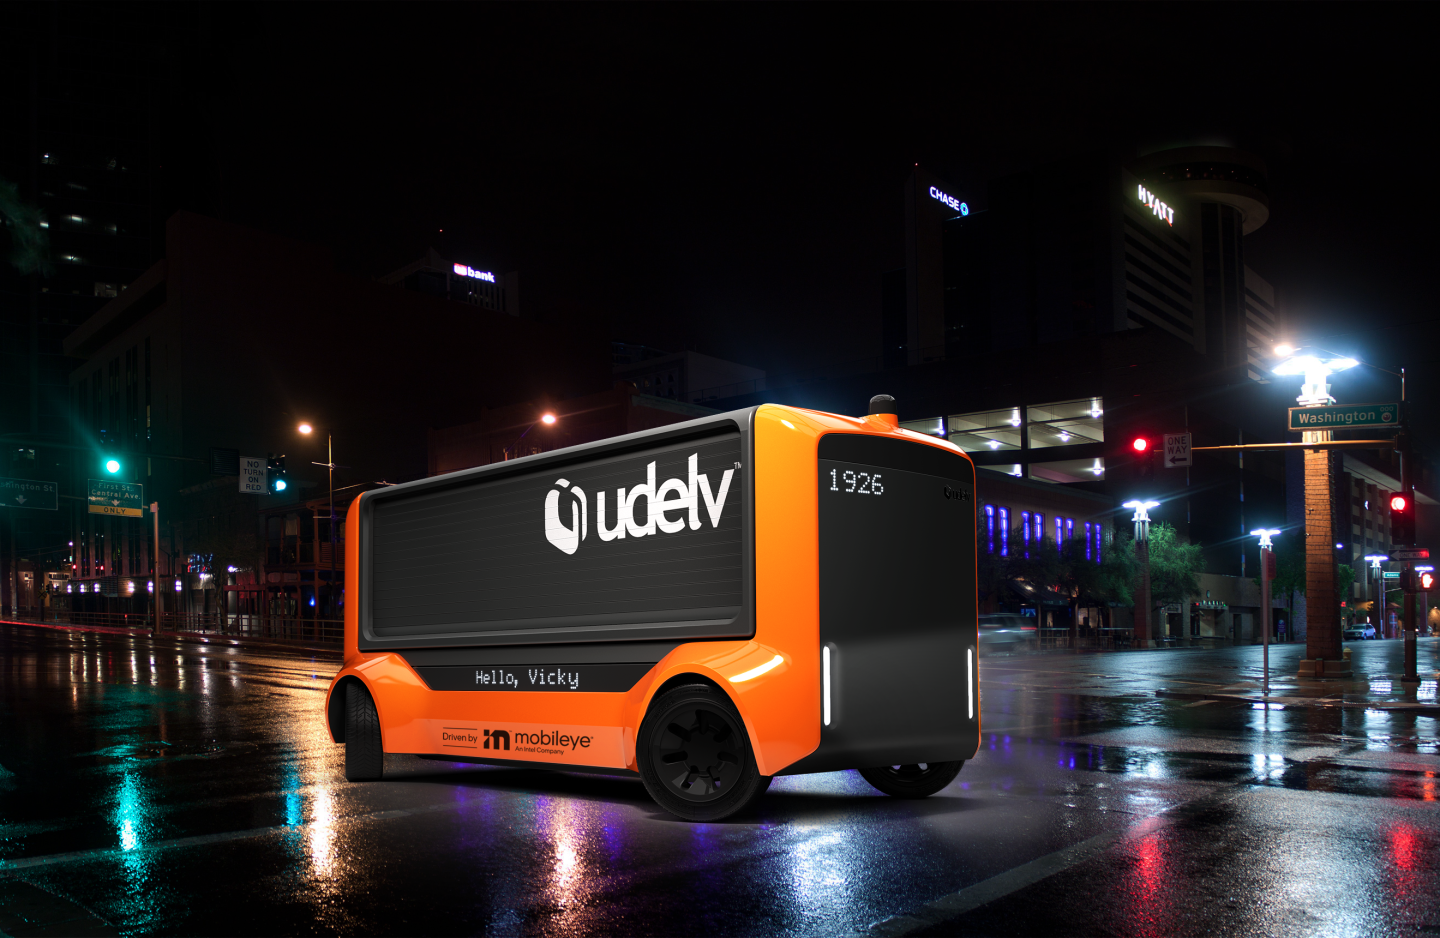 The Udelv Transporter is built around a self-driving system from Intel's Mobileye